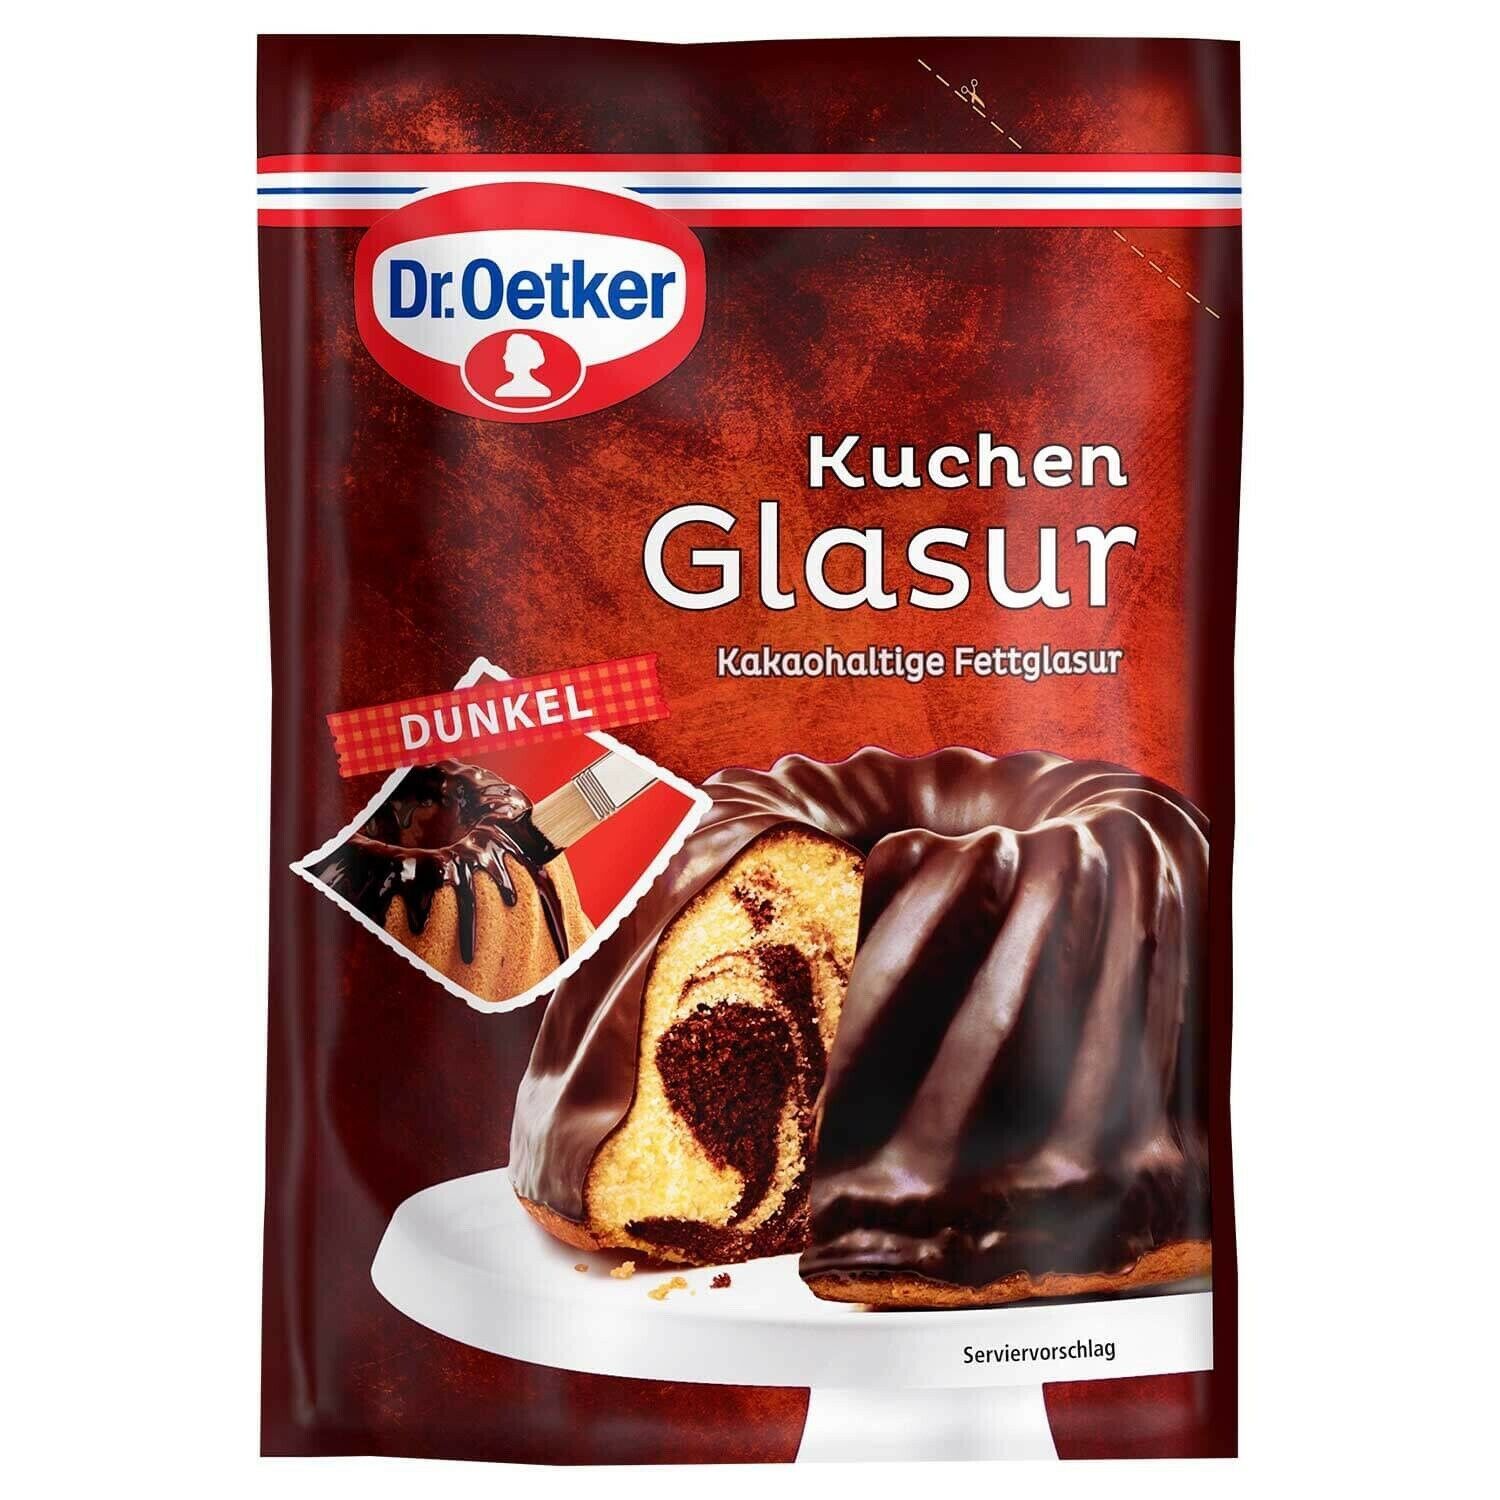 Dr.Oetker DARK chocolate Glaze/Icing -Ready to serve -1 pack -FREE US SHIPPING - $10.88